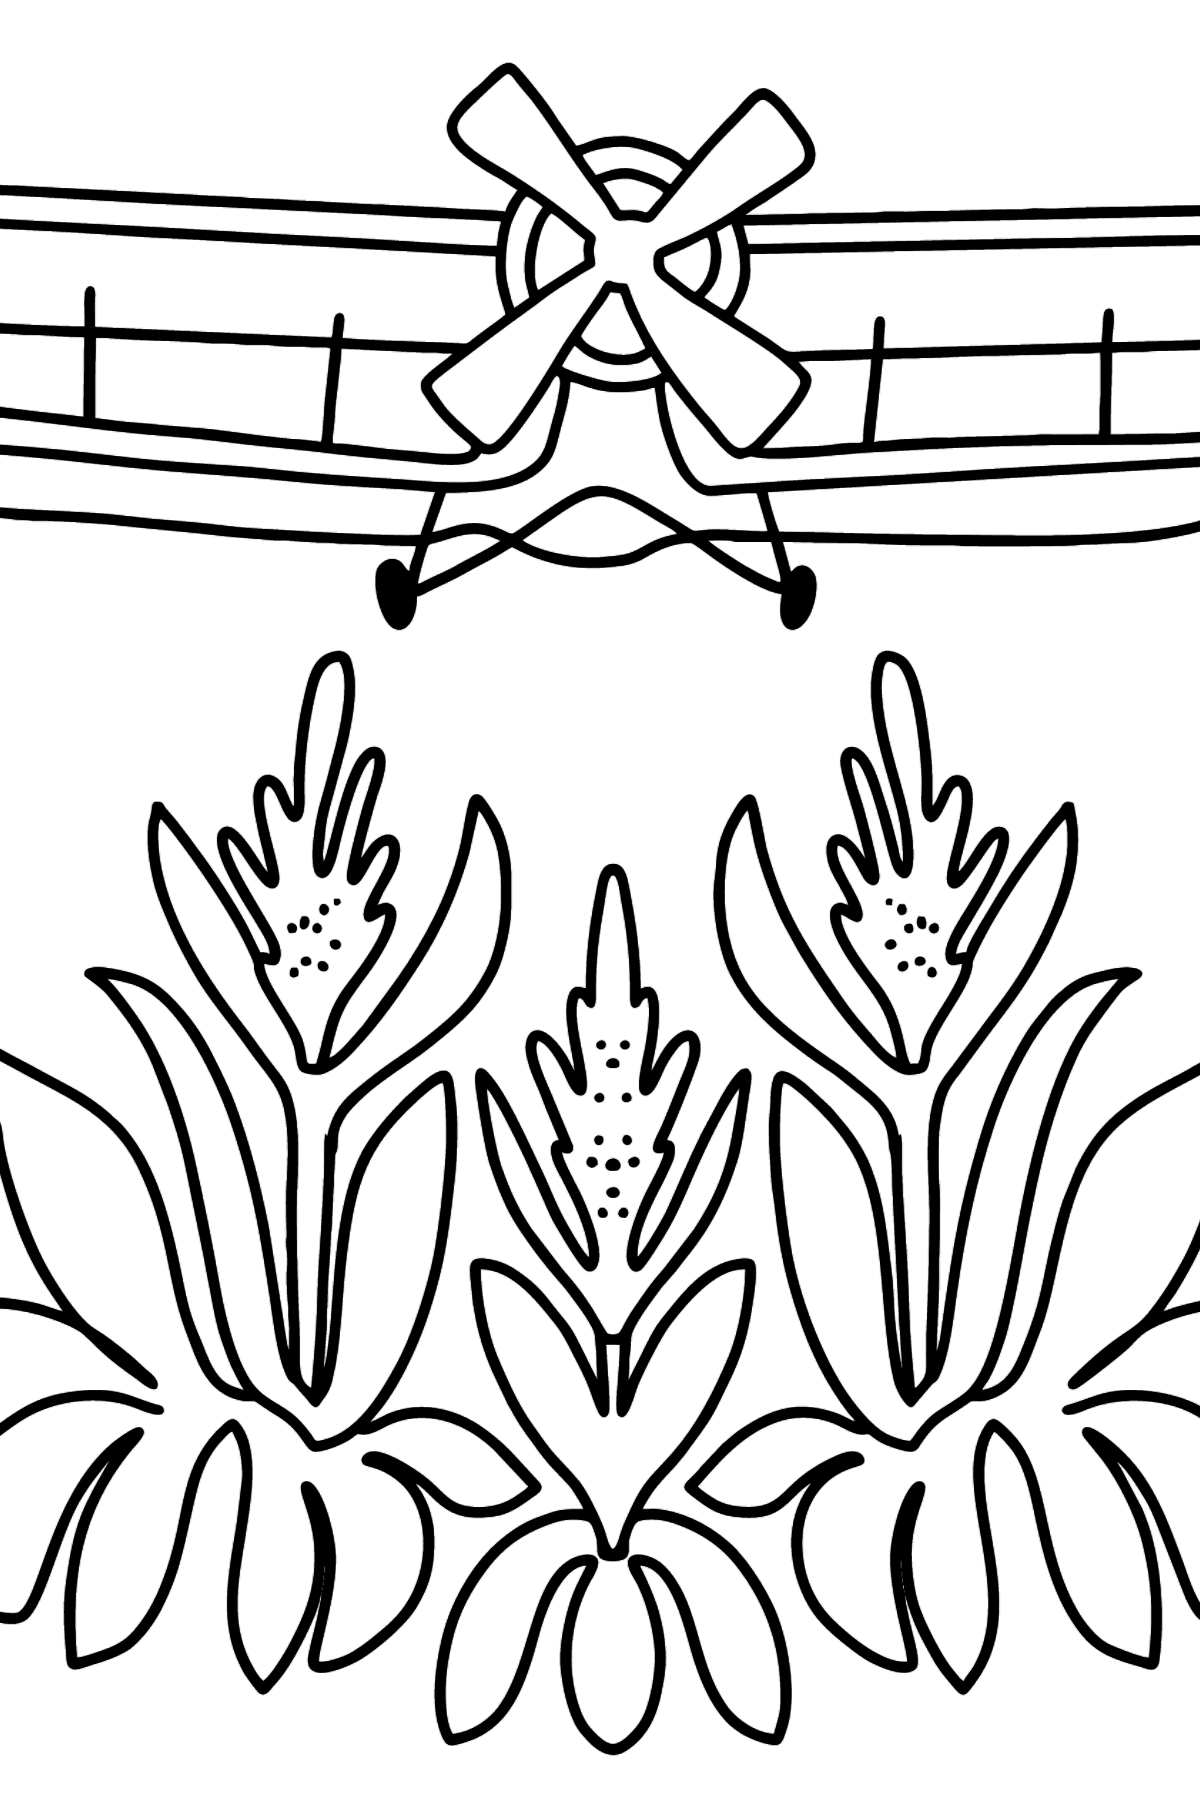 Agricultural plane coloring page - Coloring Pages for Kids